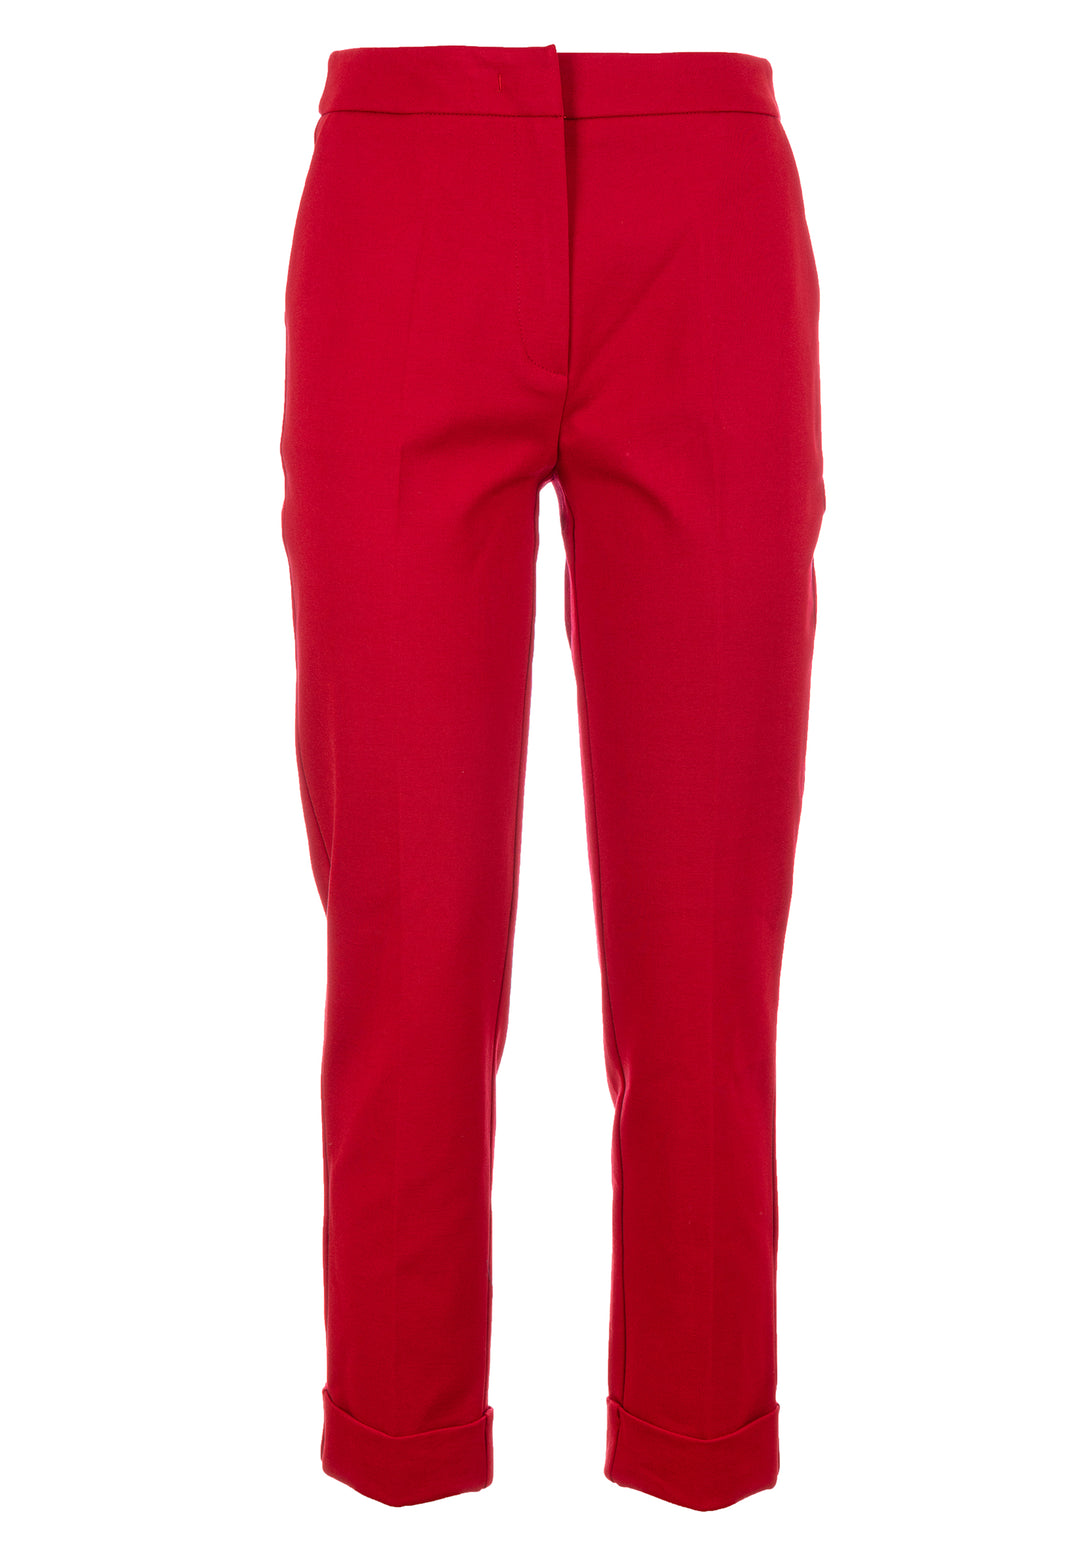 Chino pant slim fit made in Milano stitch fabric